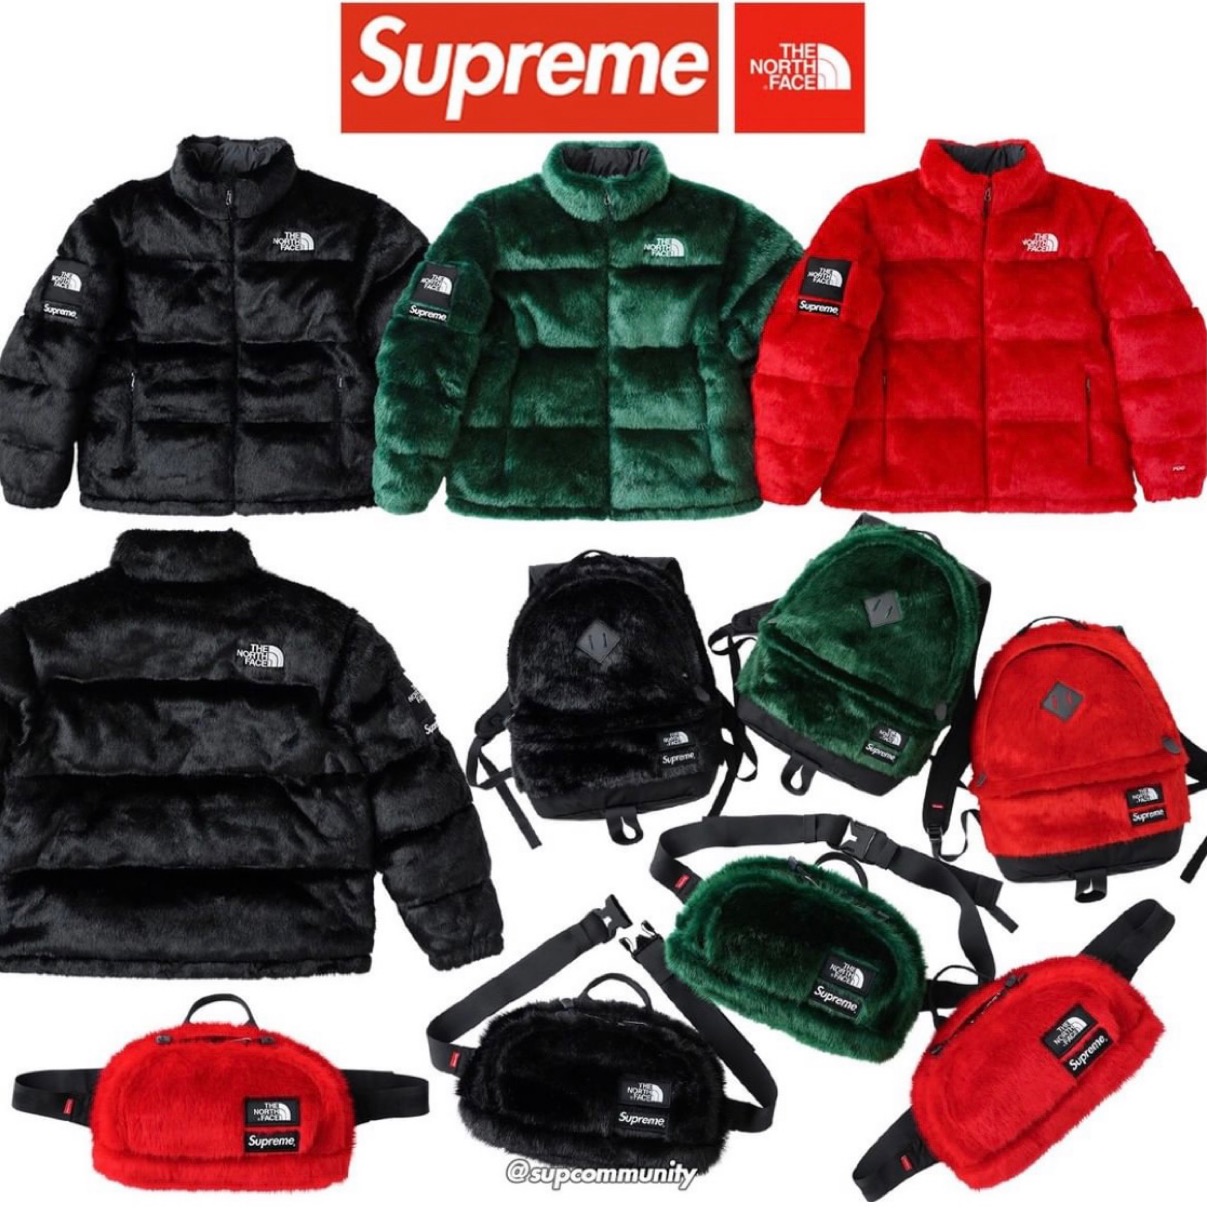 Supreme × The North Face】2020FW Week16 国内12月12日に発売予定 全商品一覧 価格など UP TO DATE